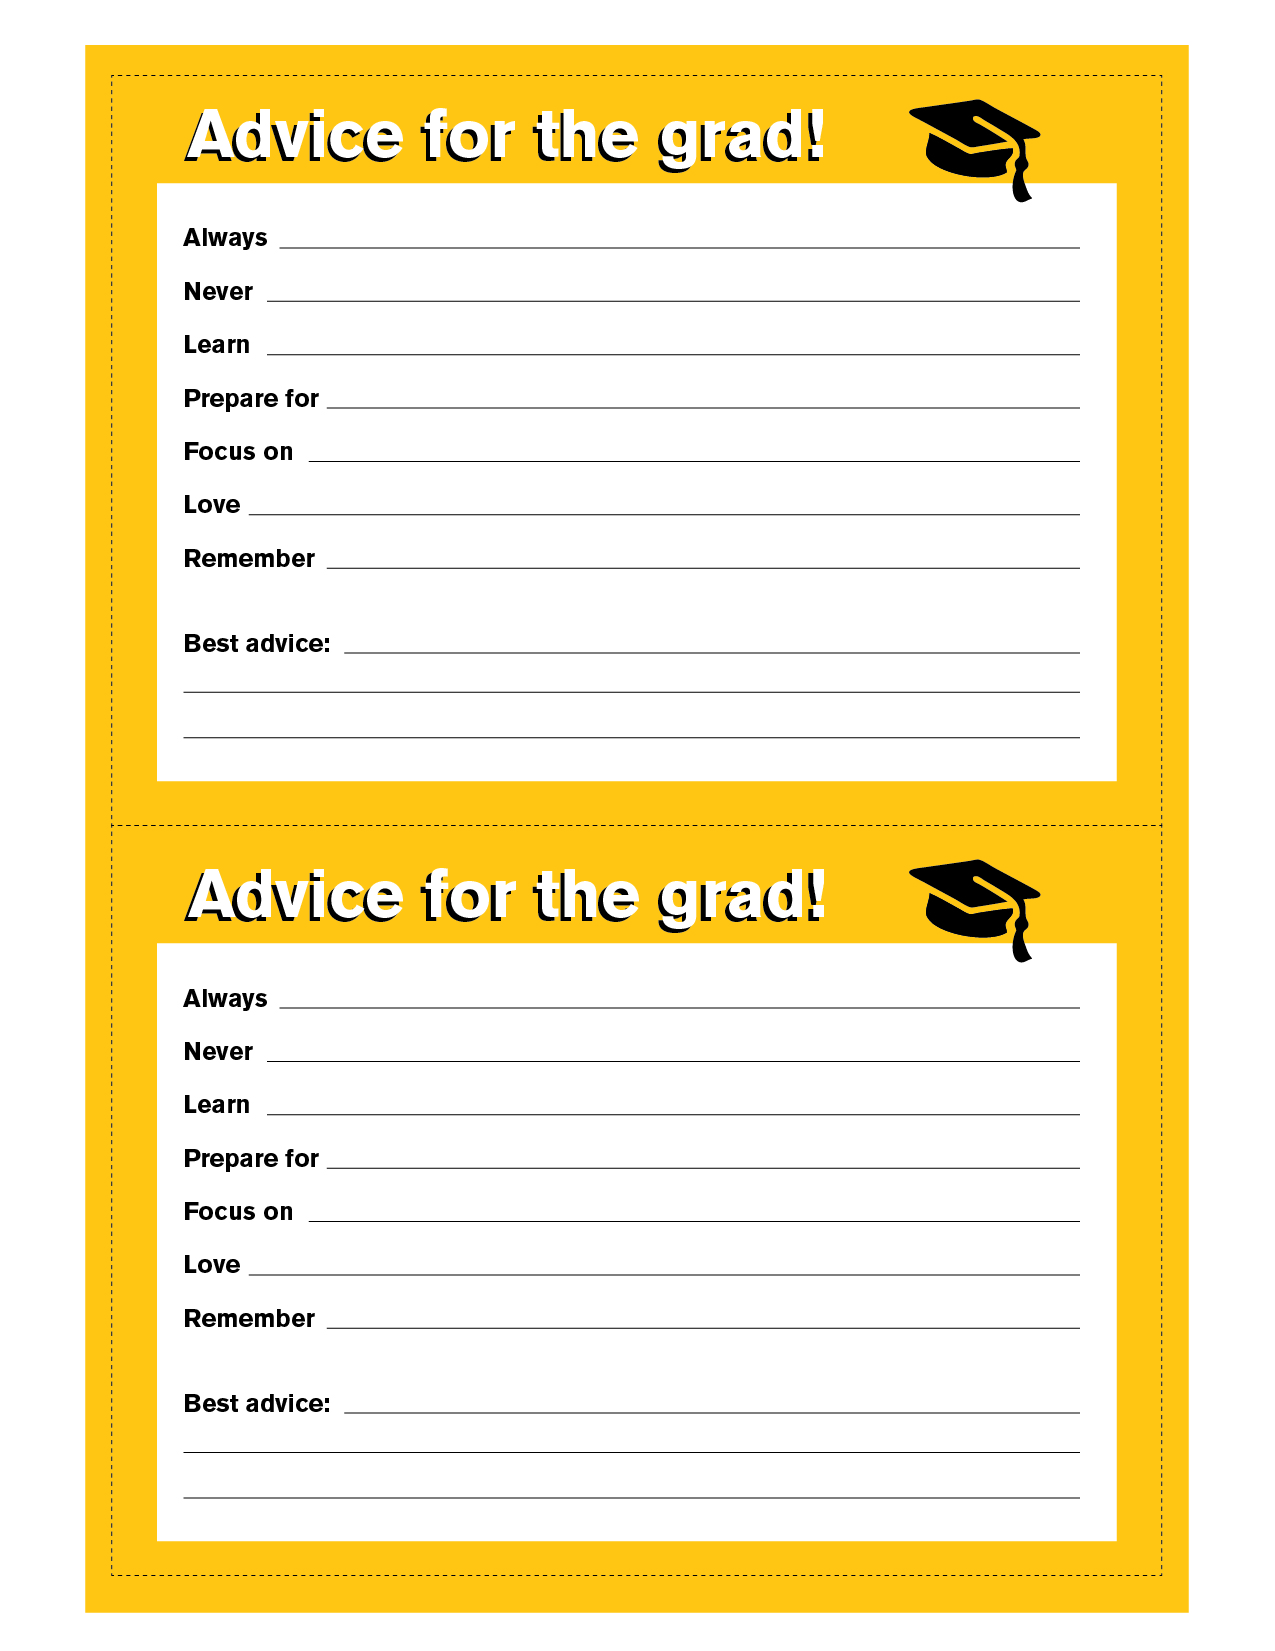 Gold advice for the grad card